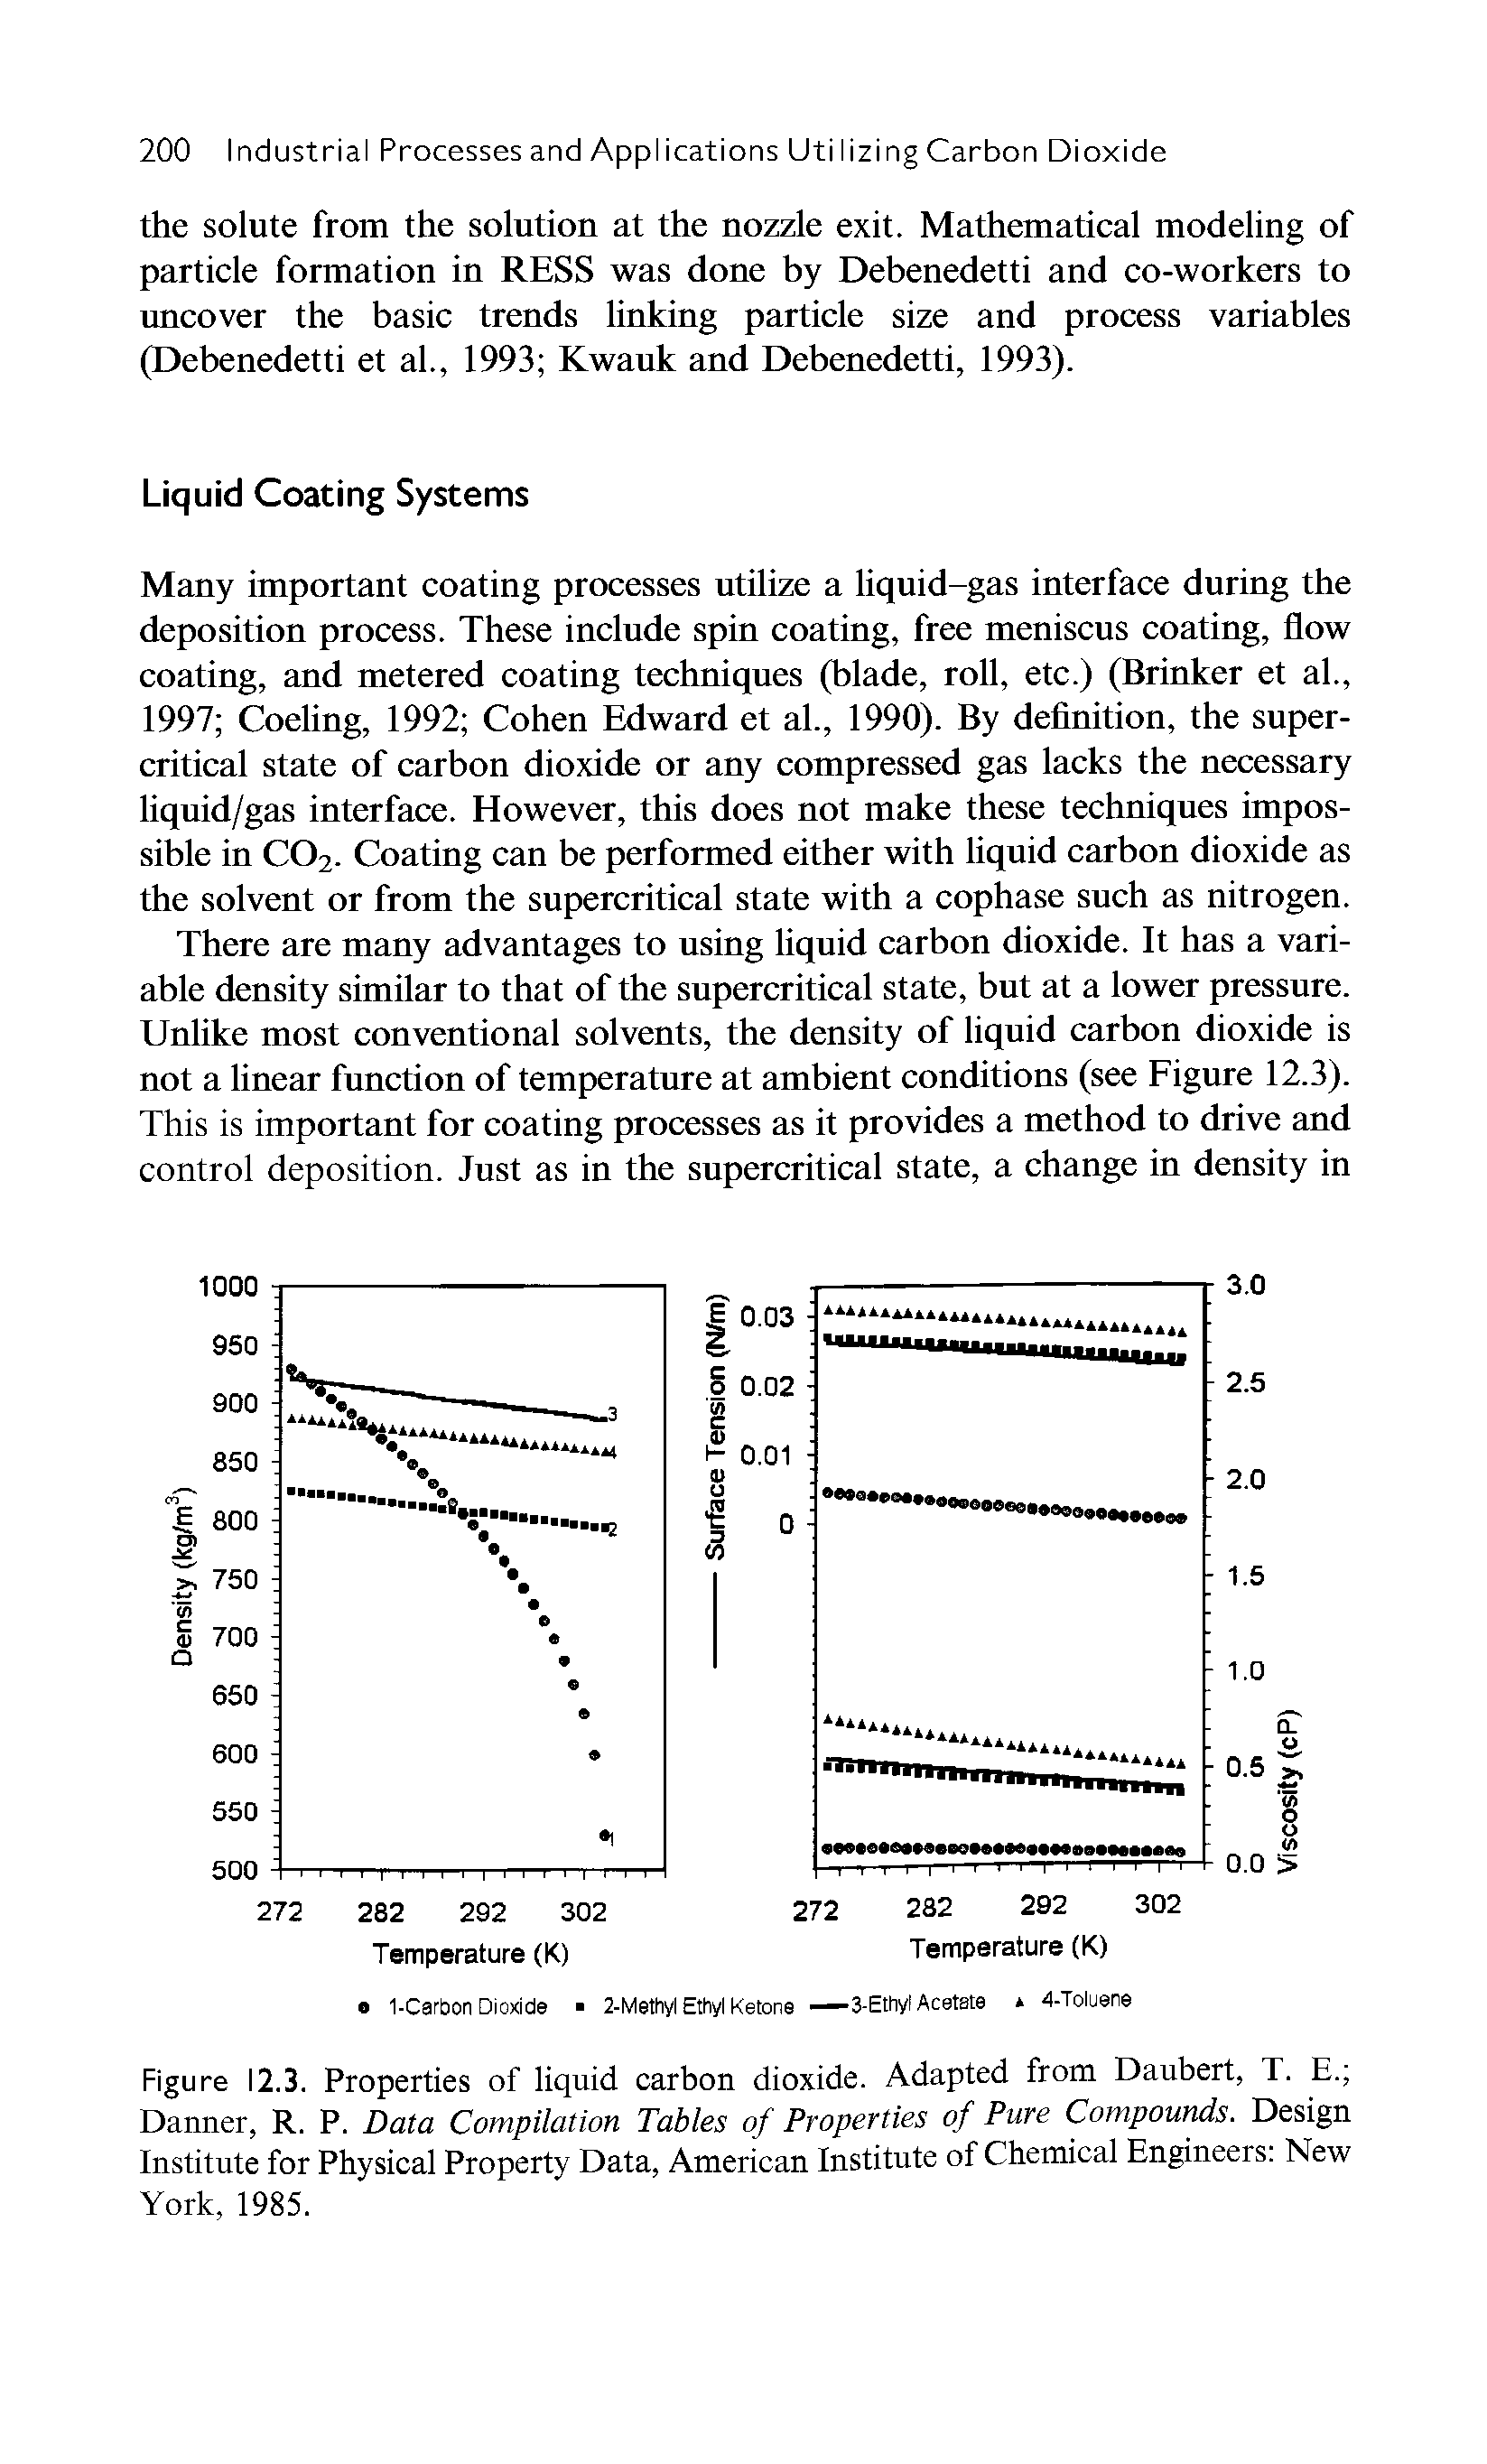 Figure 12.3. Properties of liquid carbon dioxide. Adapted from Daubert, T. E. Danner, R. P. Data Compilation Tables of Properties of Pure Compounds. Design Institute for Physical Property Data, American Institute of Chemical Engineers New York, 1985.